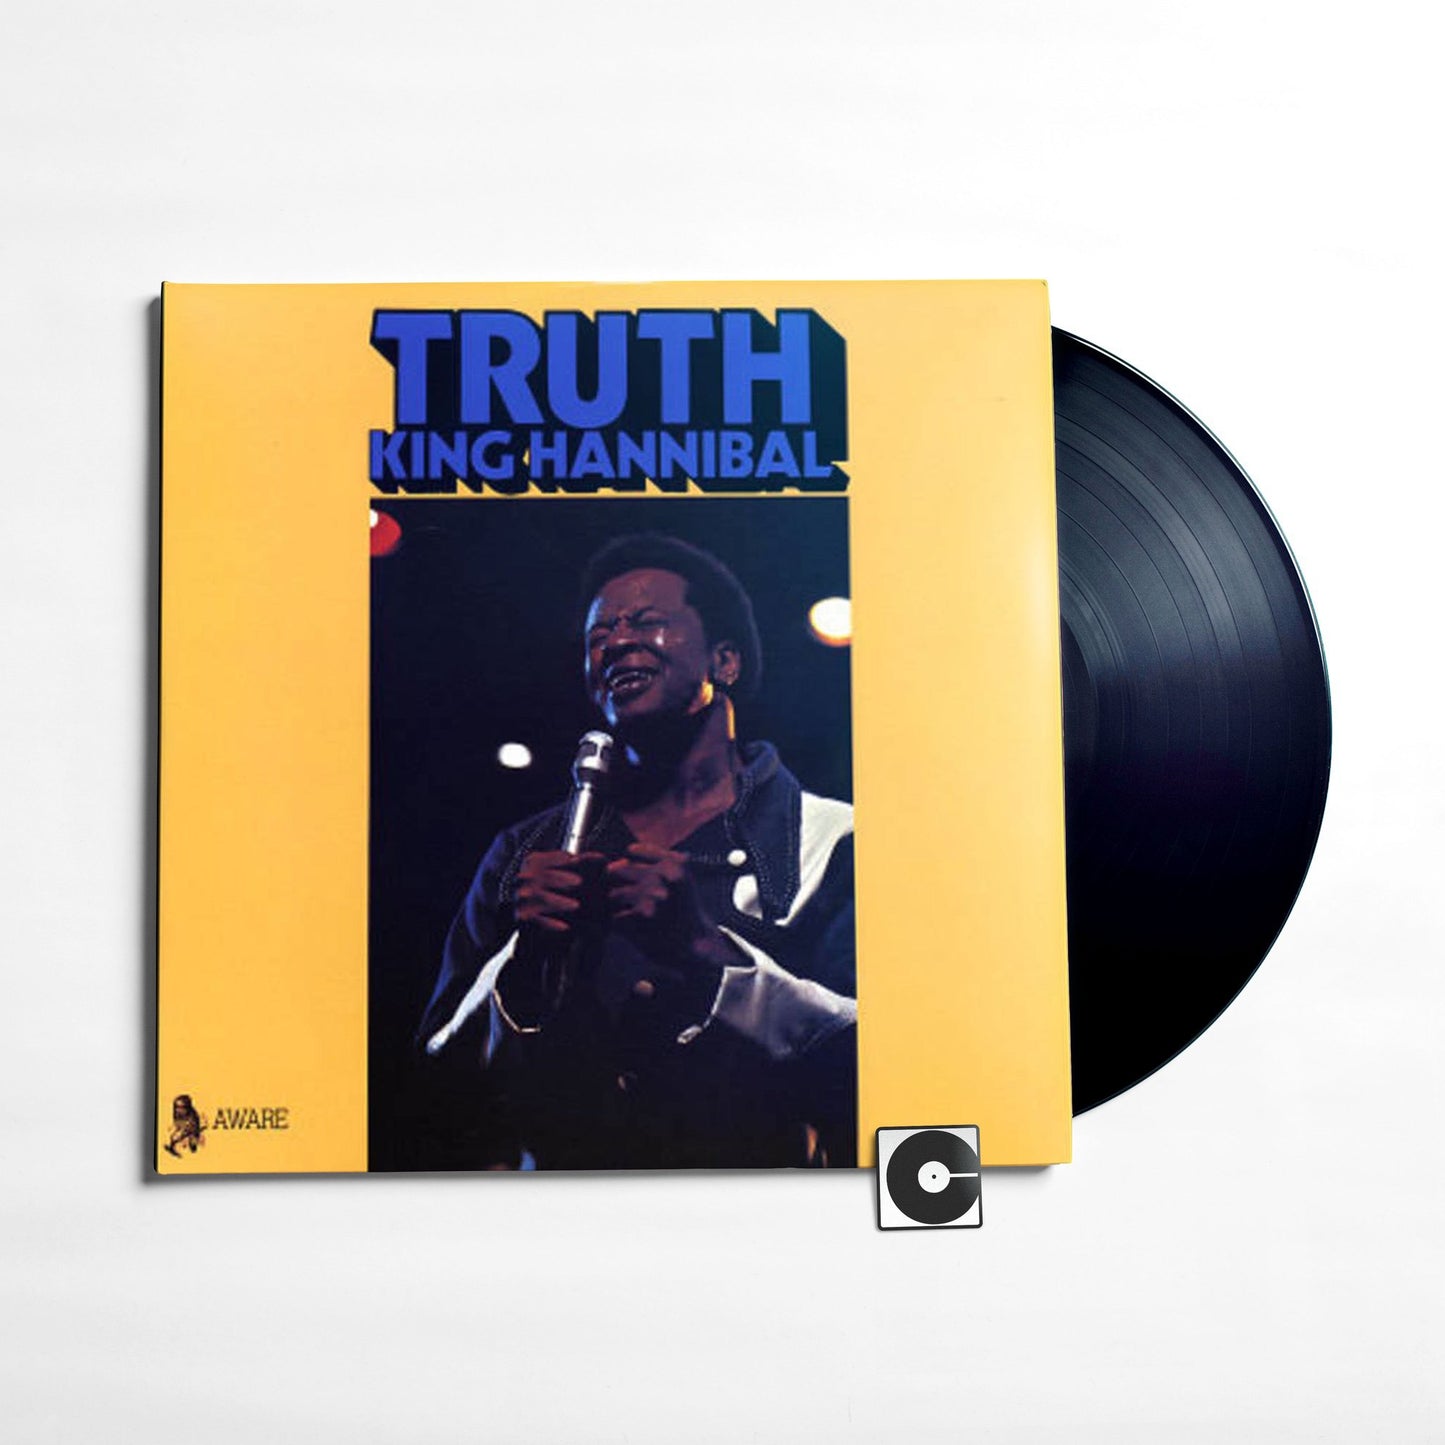 King Hannibal - "Truth: Featuring Lee Moses"